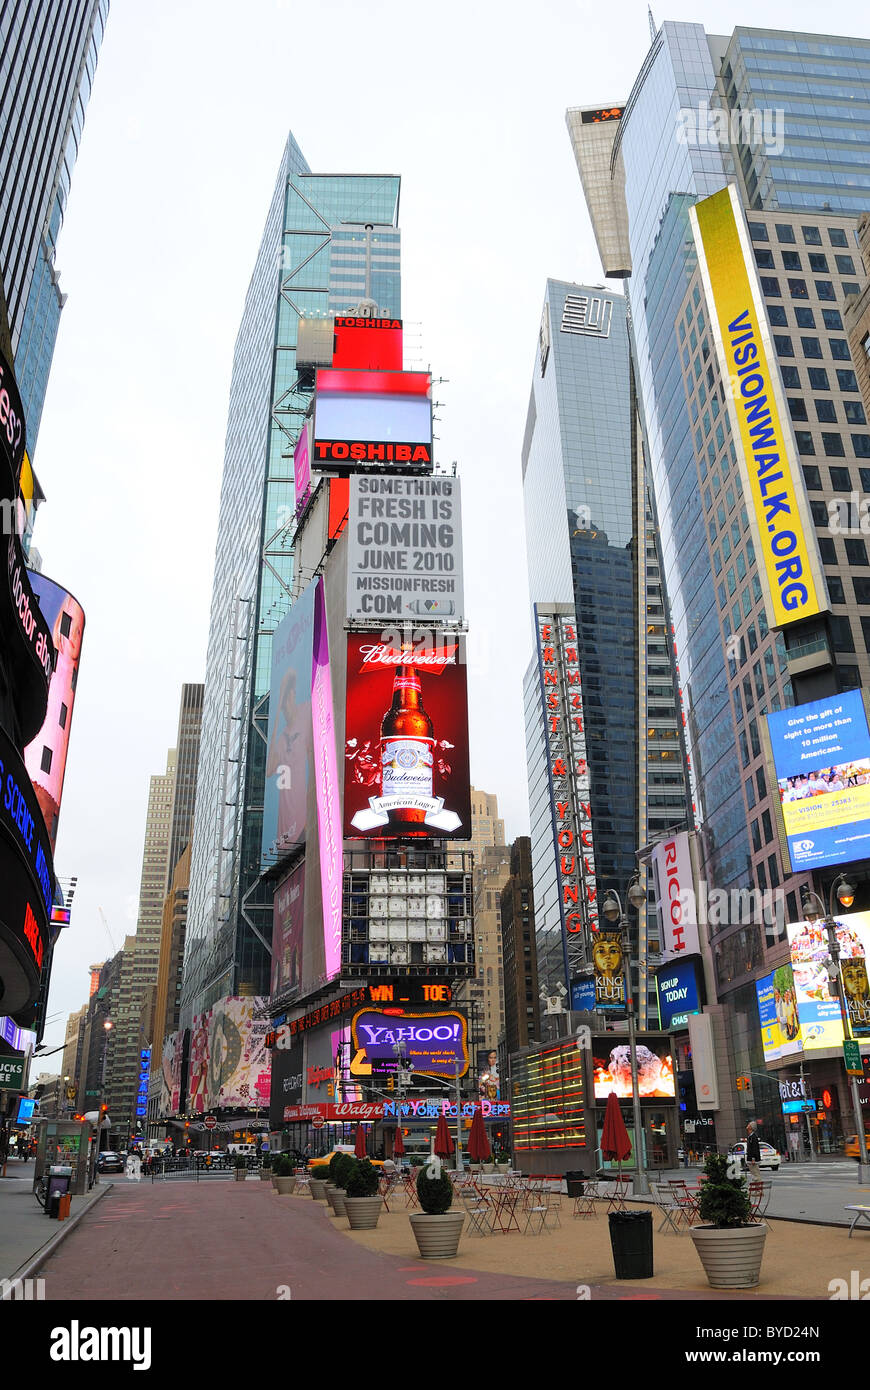 The Historic Times Square in New York City with tall billboards advertising well known brands. Stock Photo